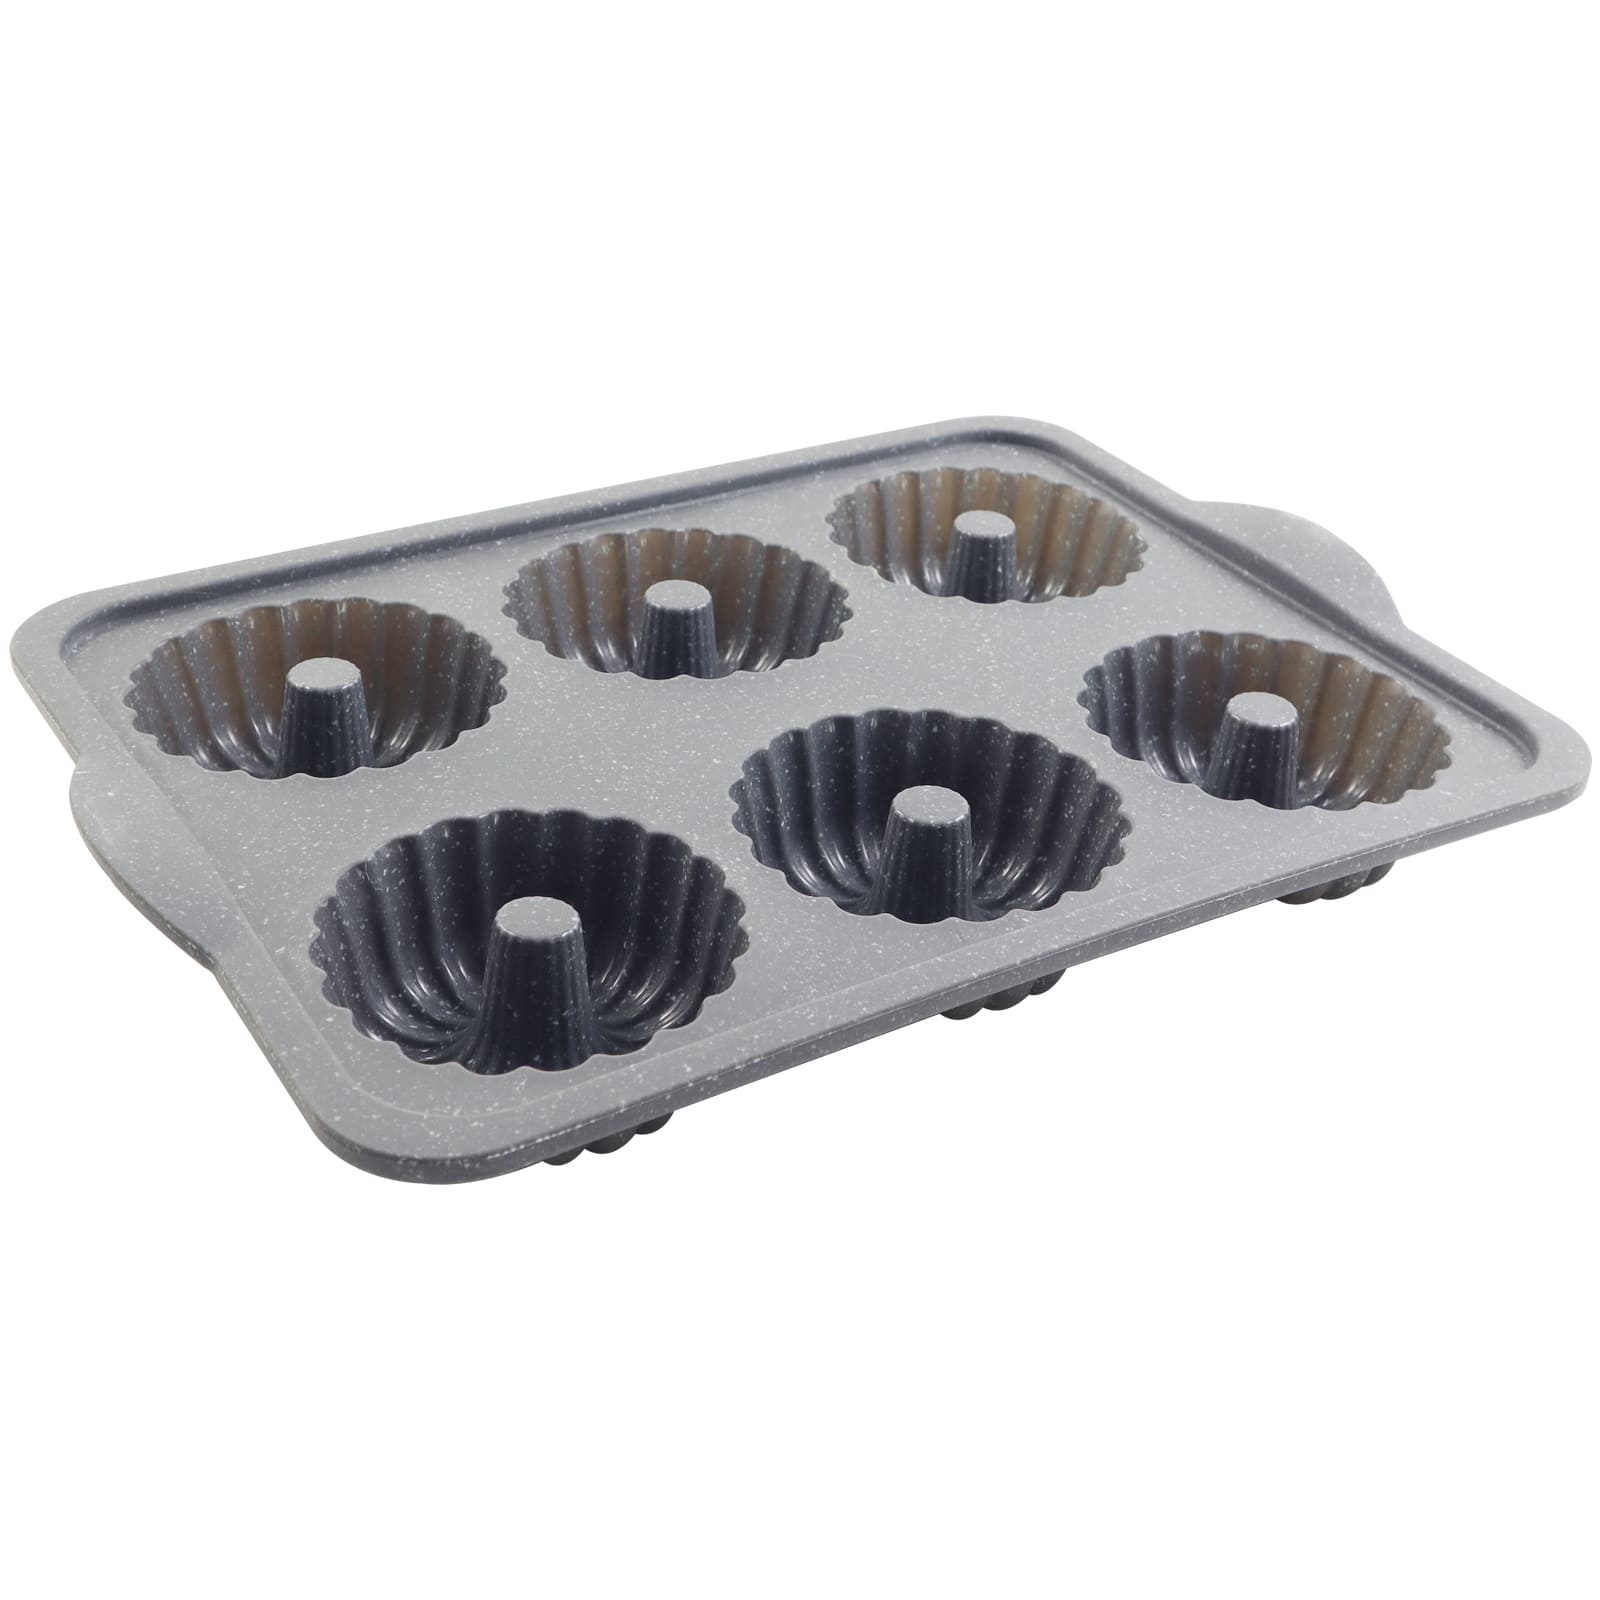 Mainstays 6 inch Mini Fluted Cake Pan, Carbon Steel, Size: 6 inch